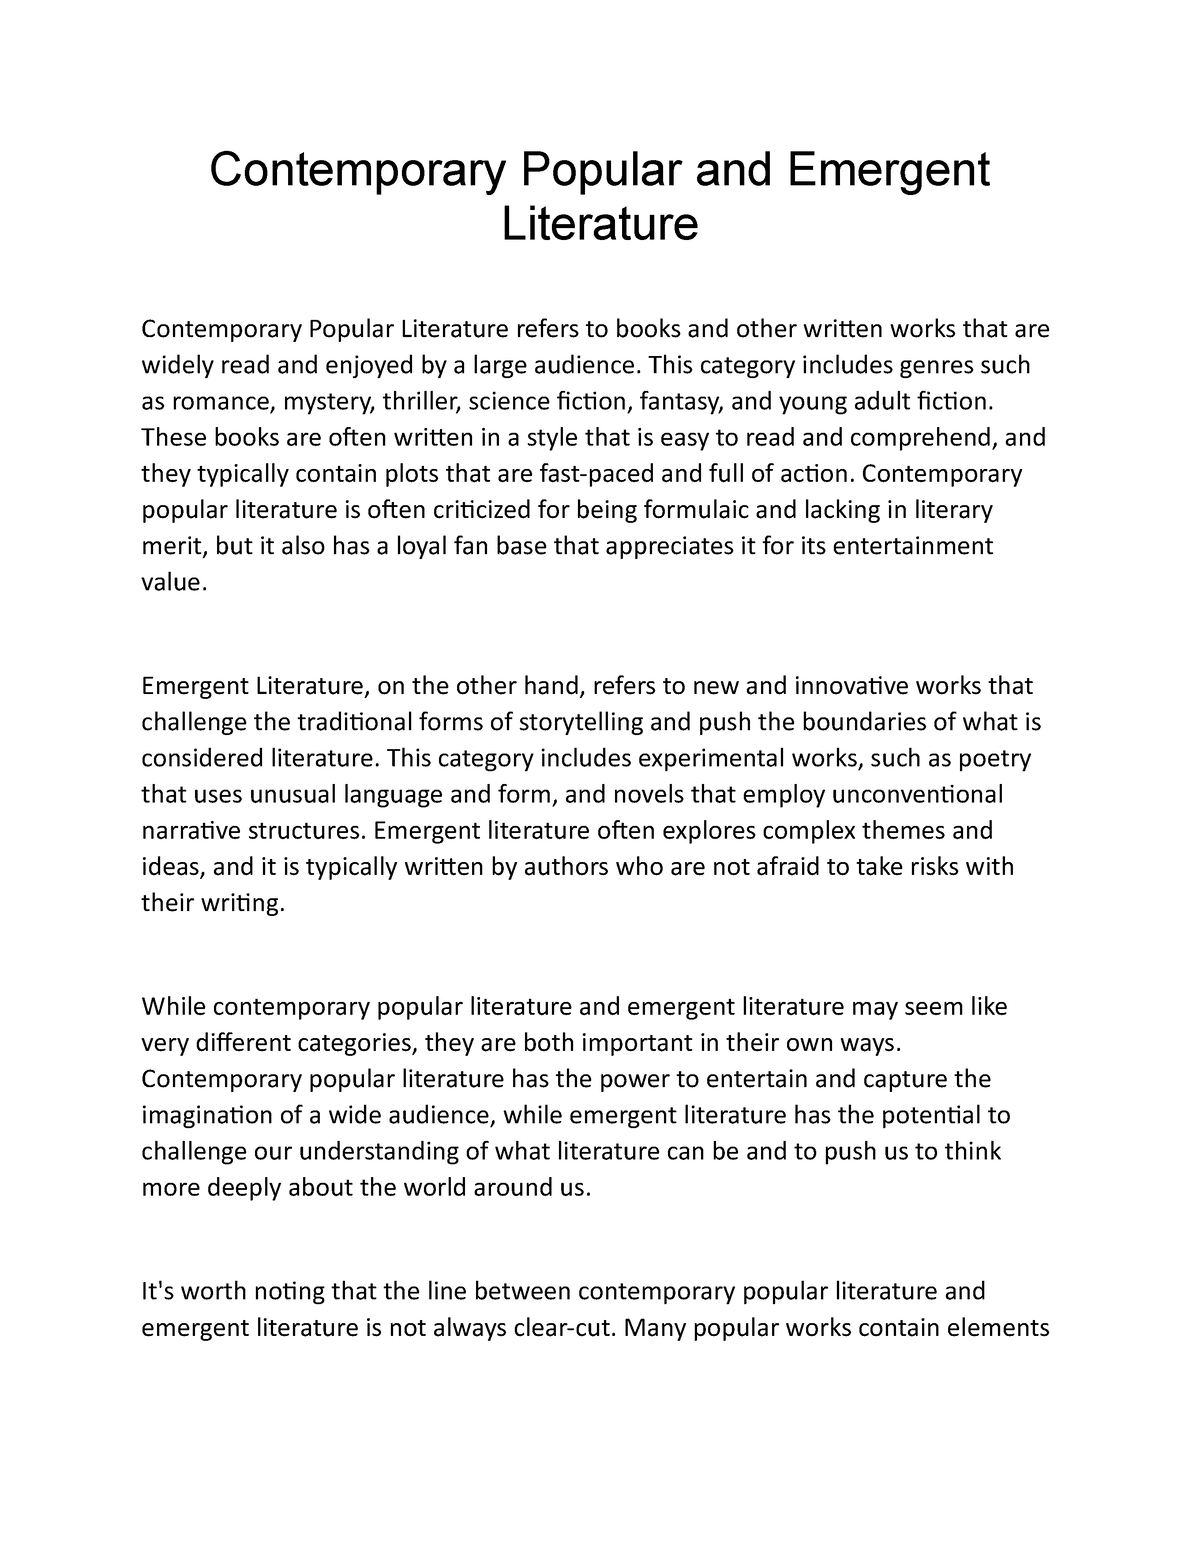 research papers on contemporary literature